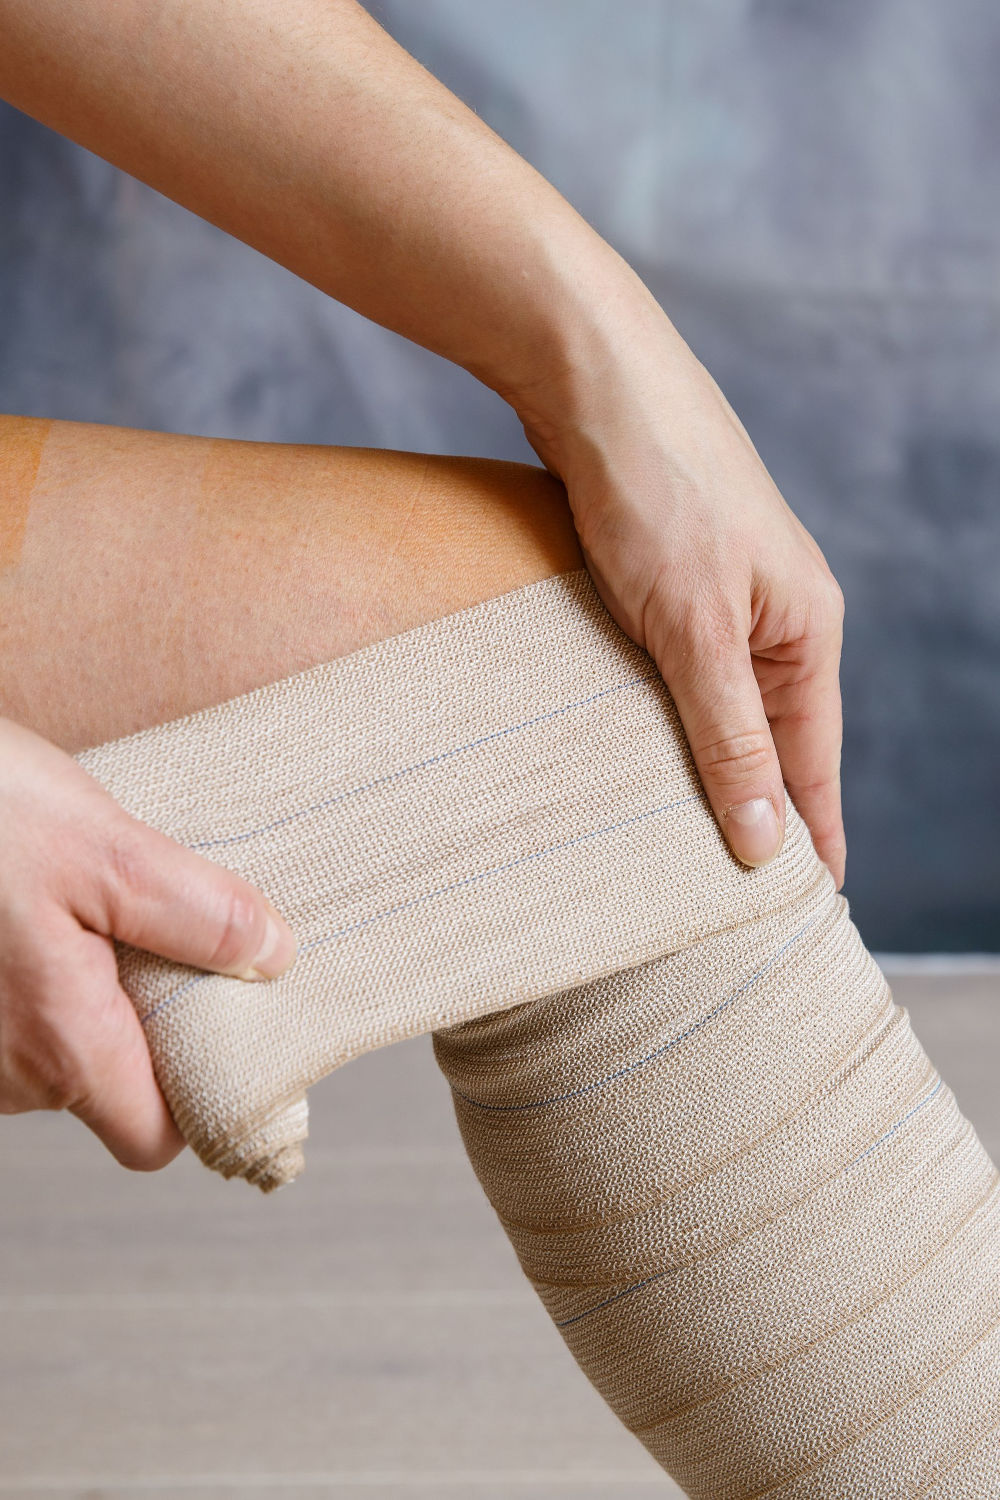 A woman wrapping her venous leg ulcer wounds